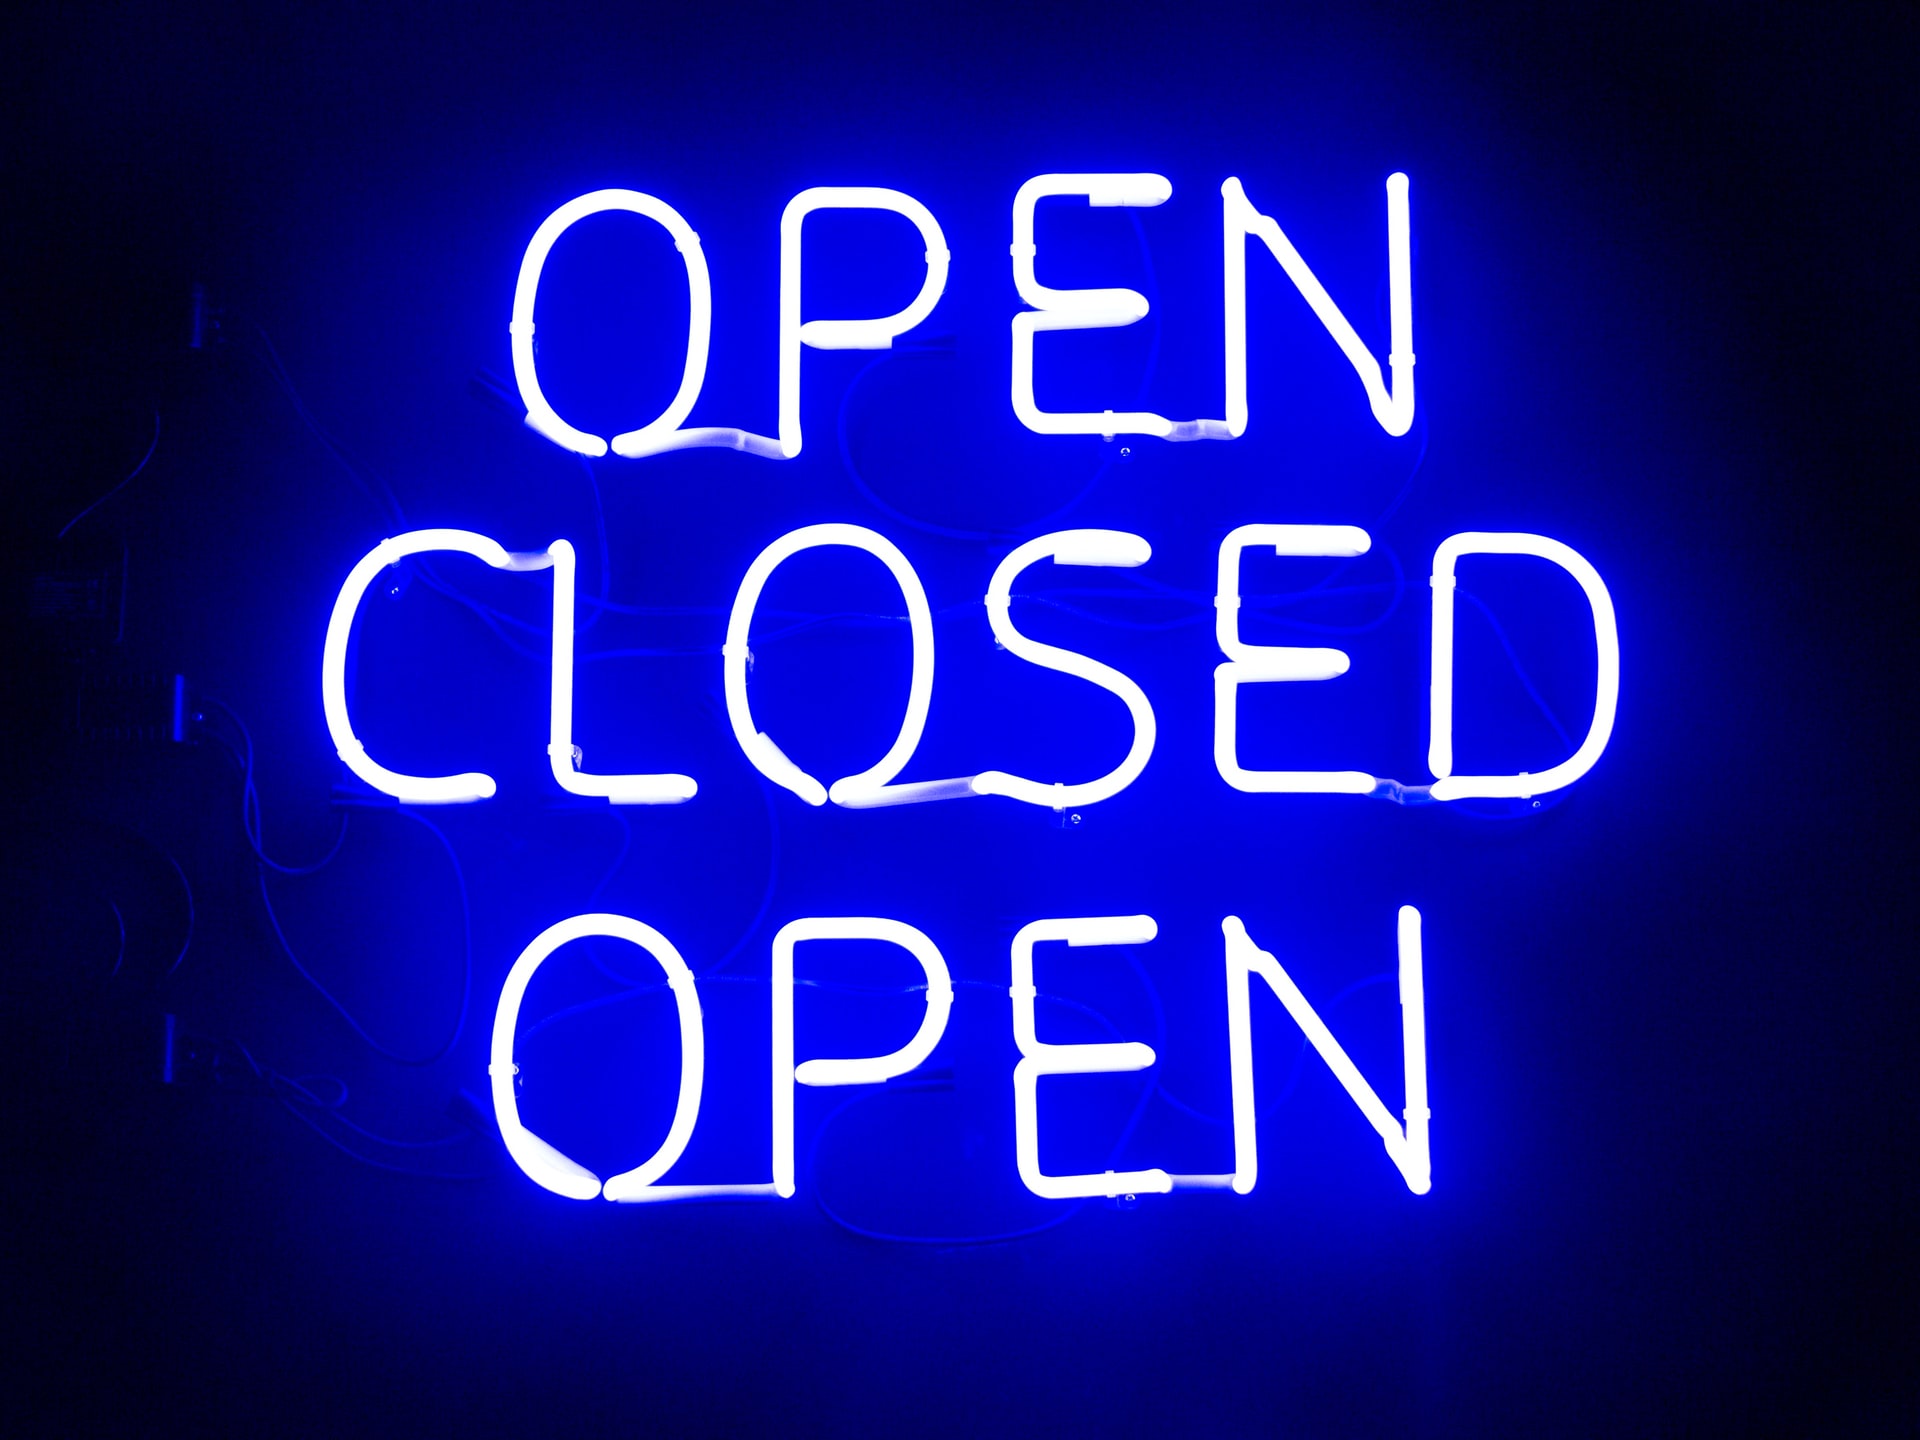 A LED Light sign that says Open Closed Open in blue lighting on a black background